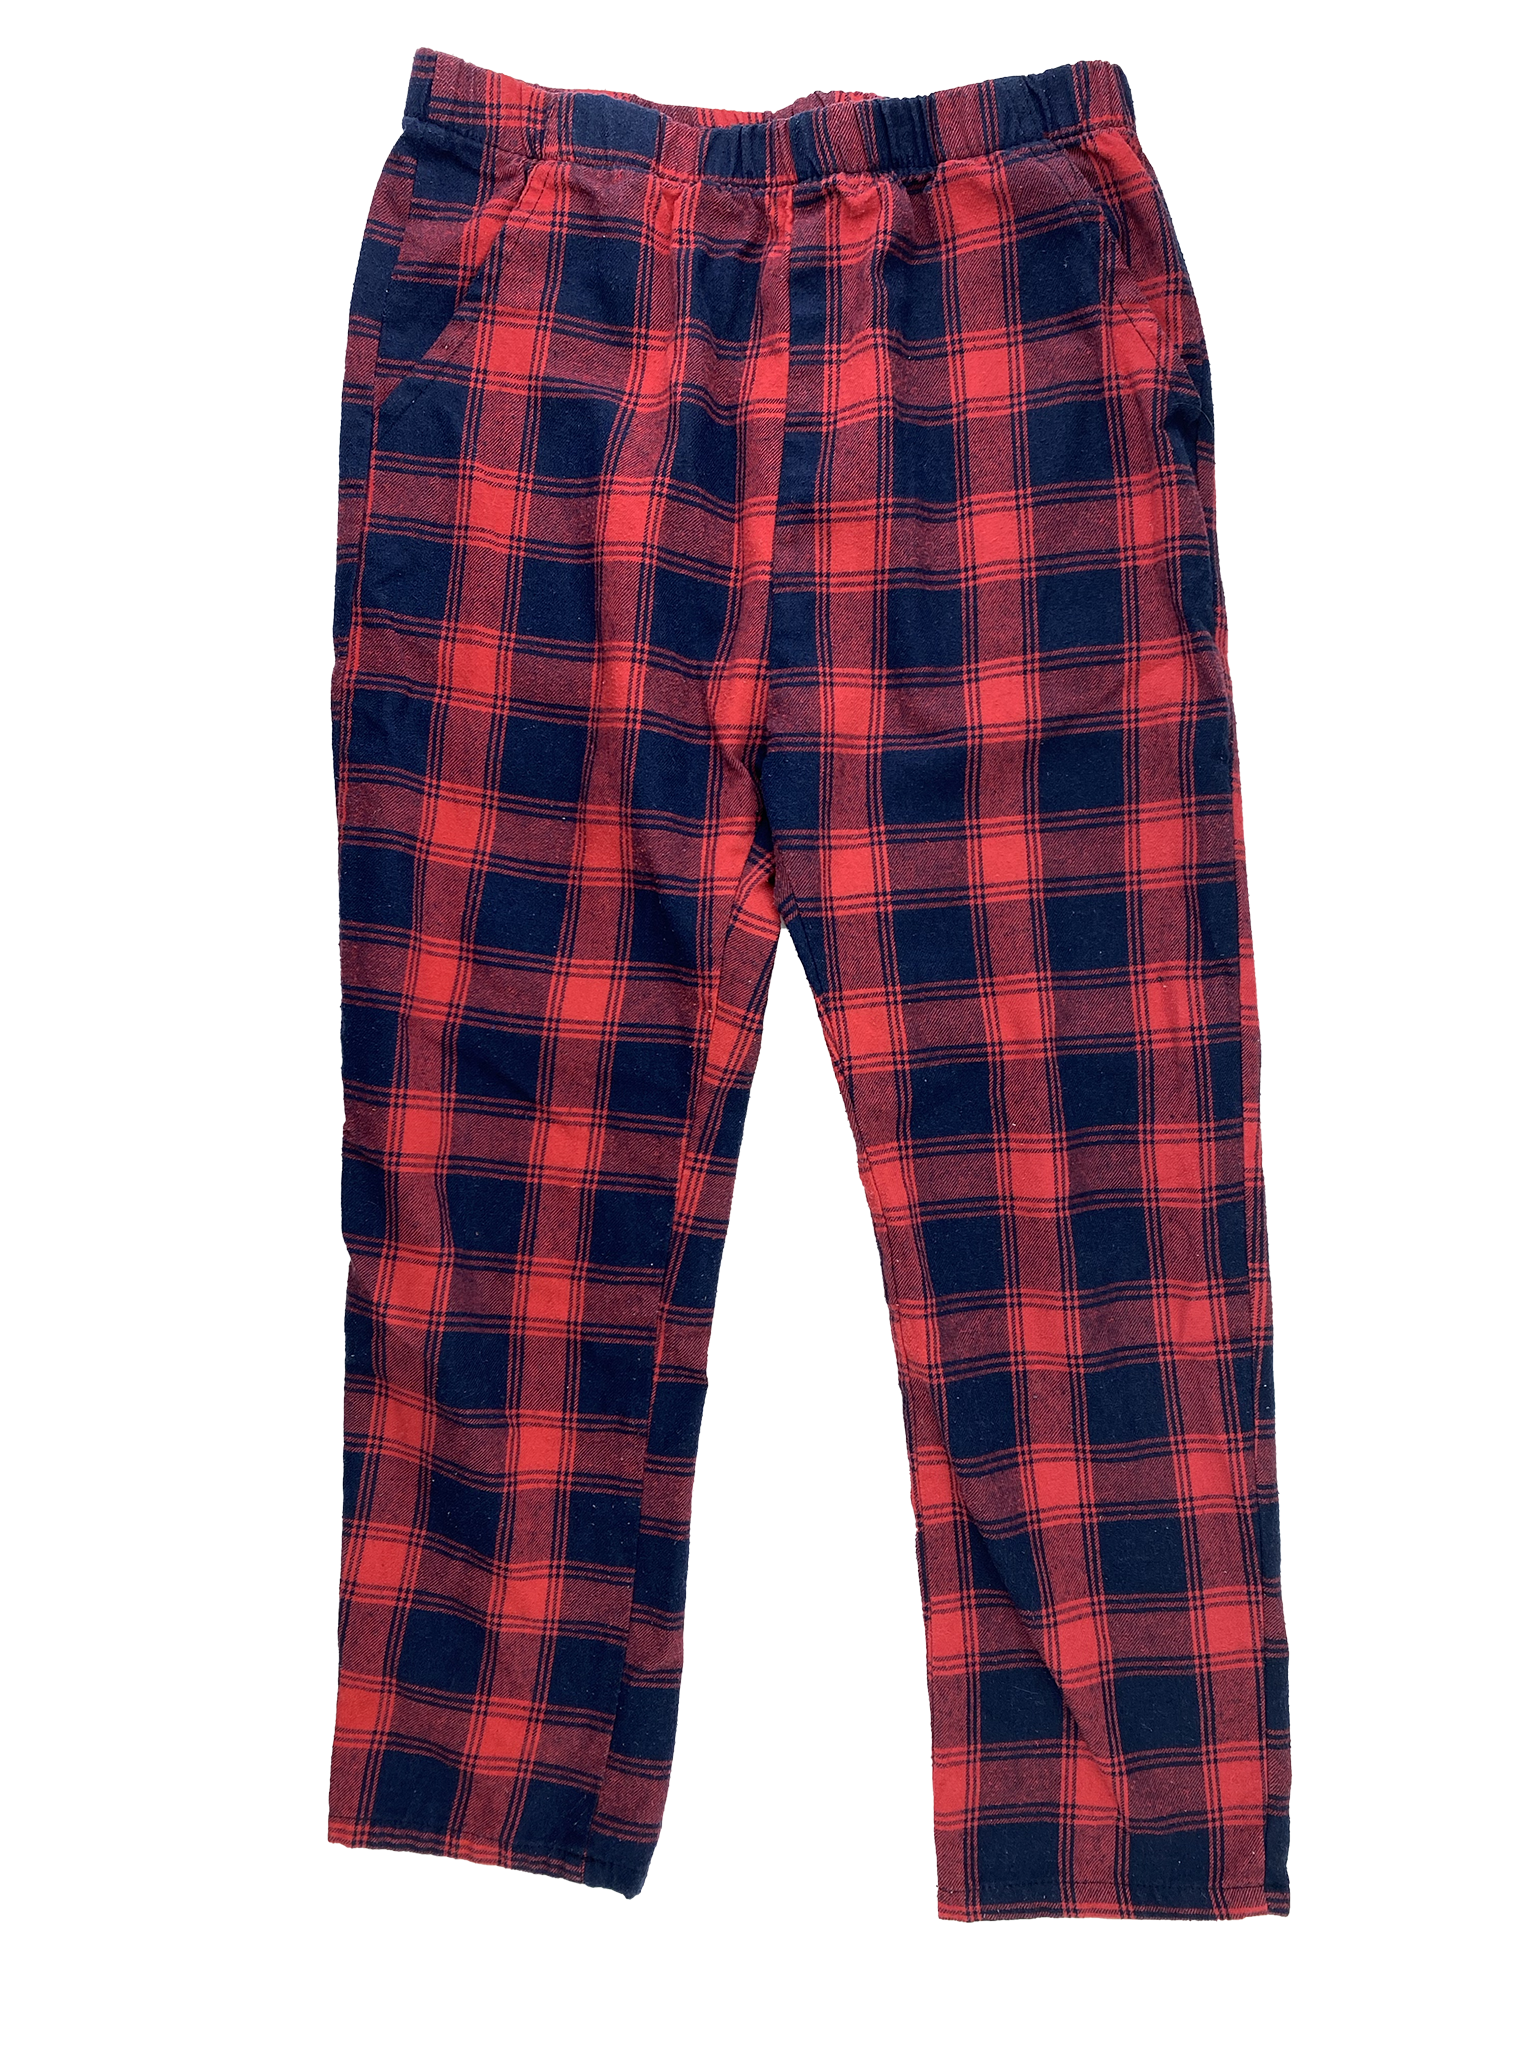 Red & Navy Plaid PJ Bottoms 10-11 – The Sweet Pea Shop